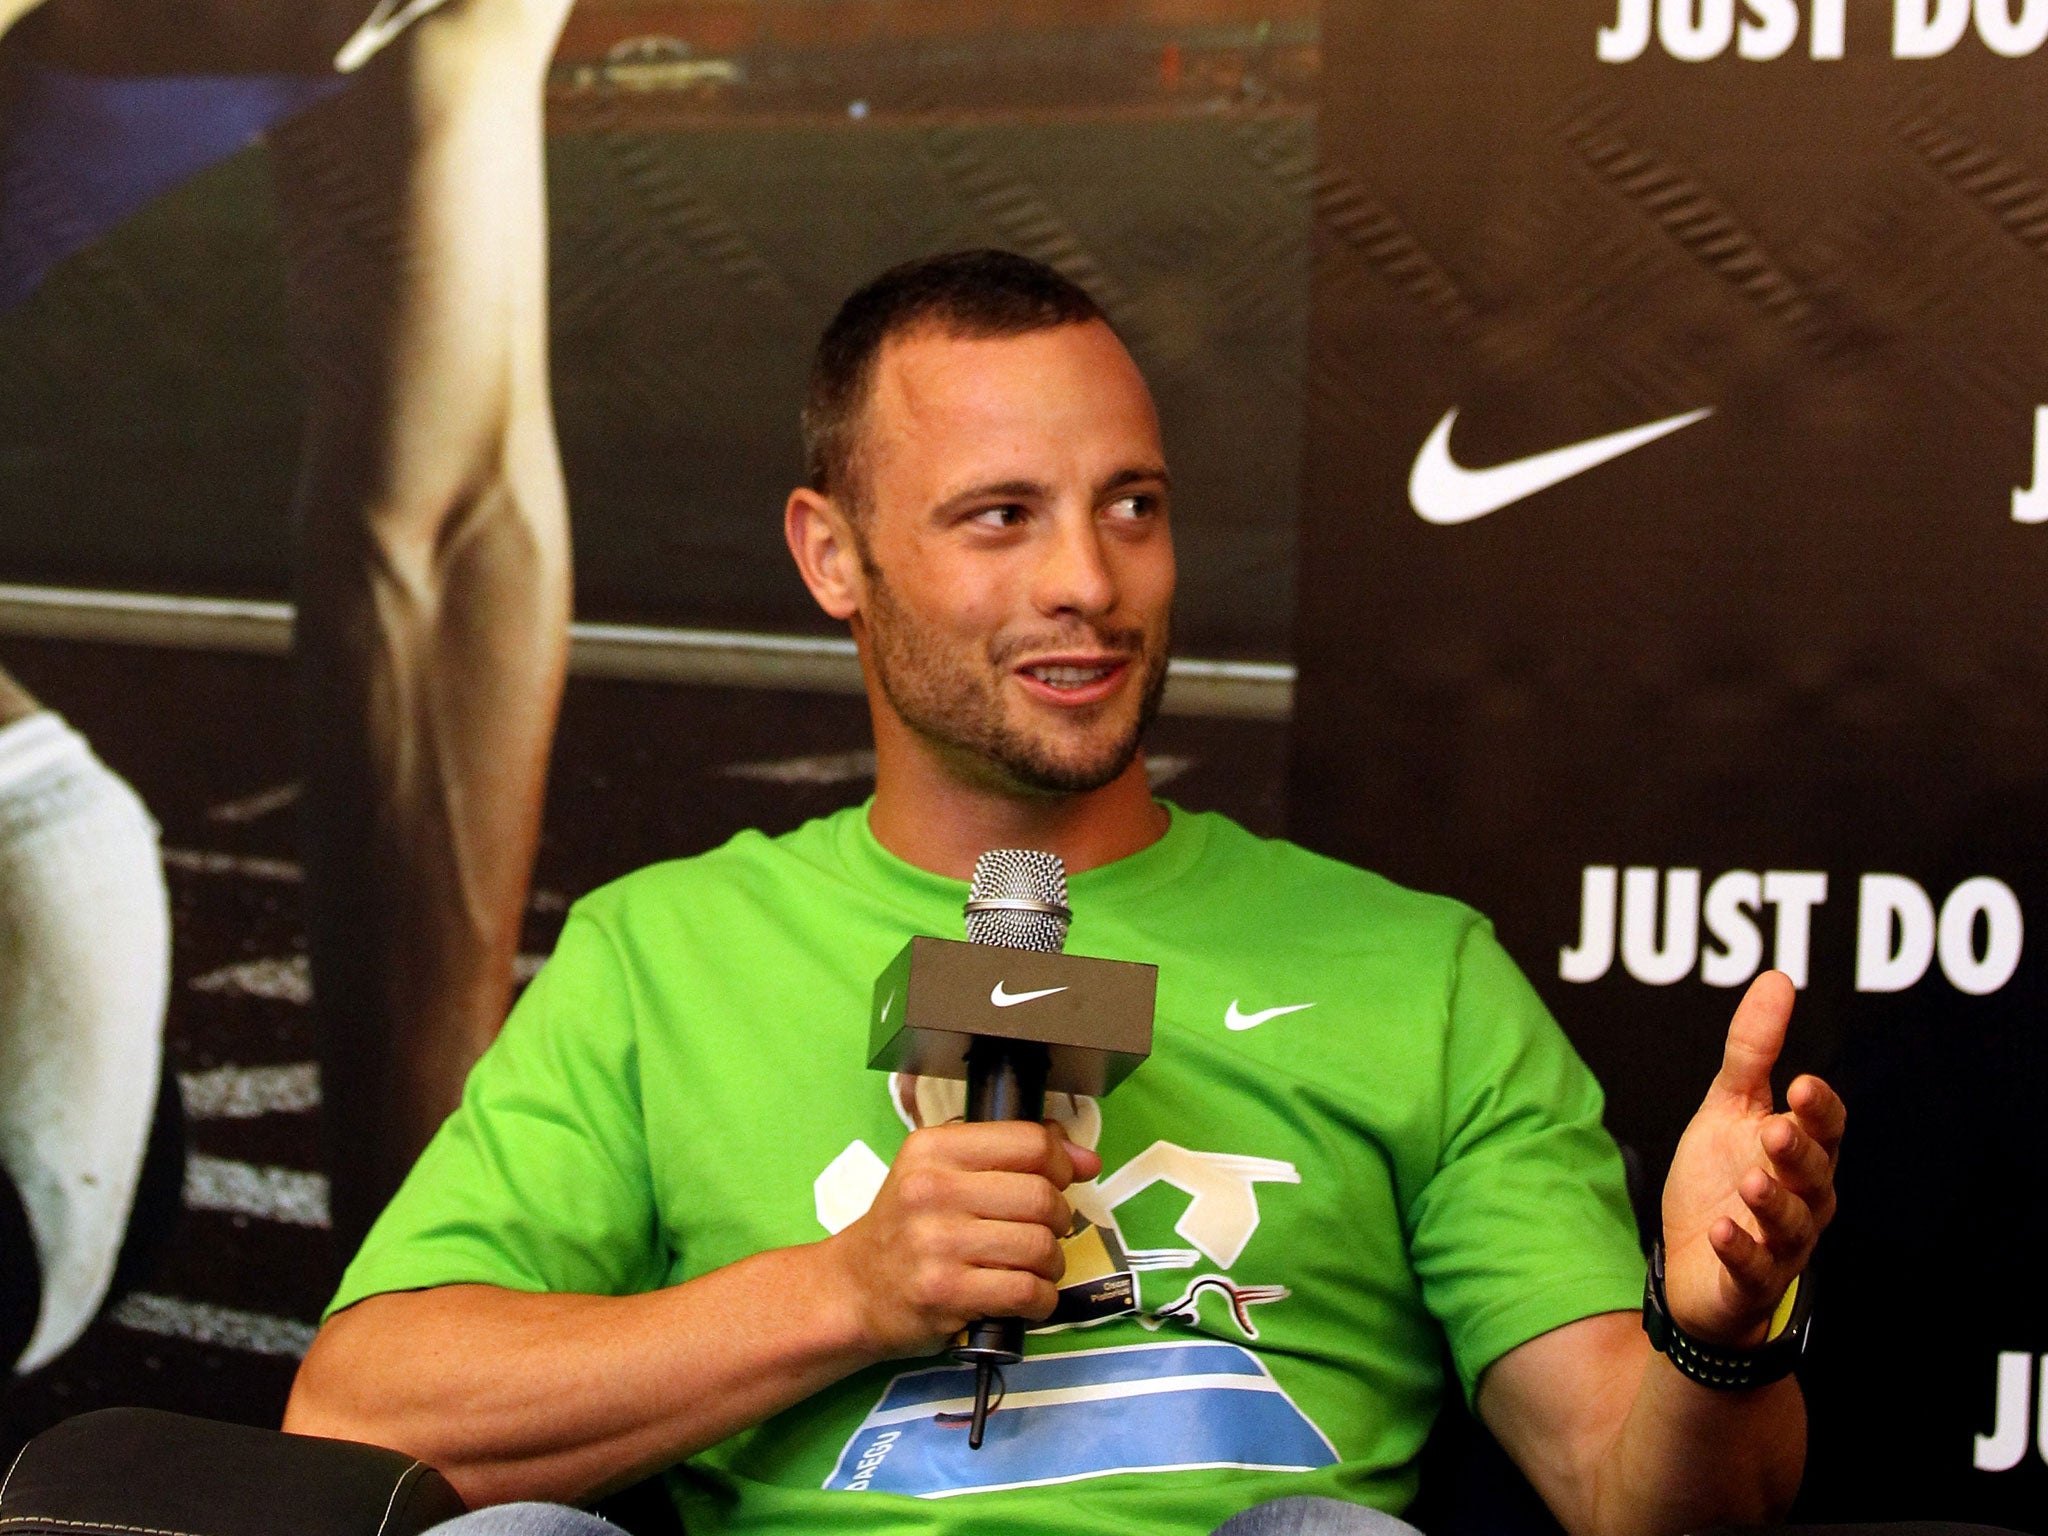 Off message: Oscar Pistorius faces a new reality after his Olympic fame